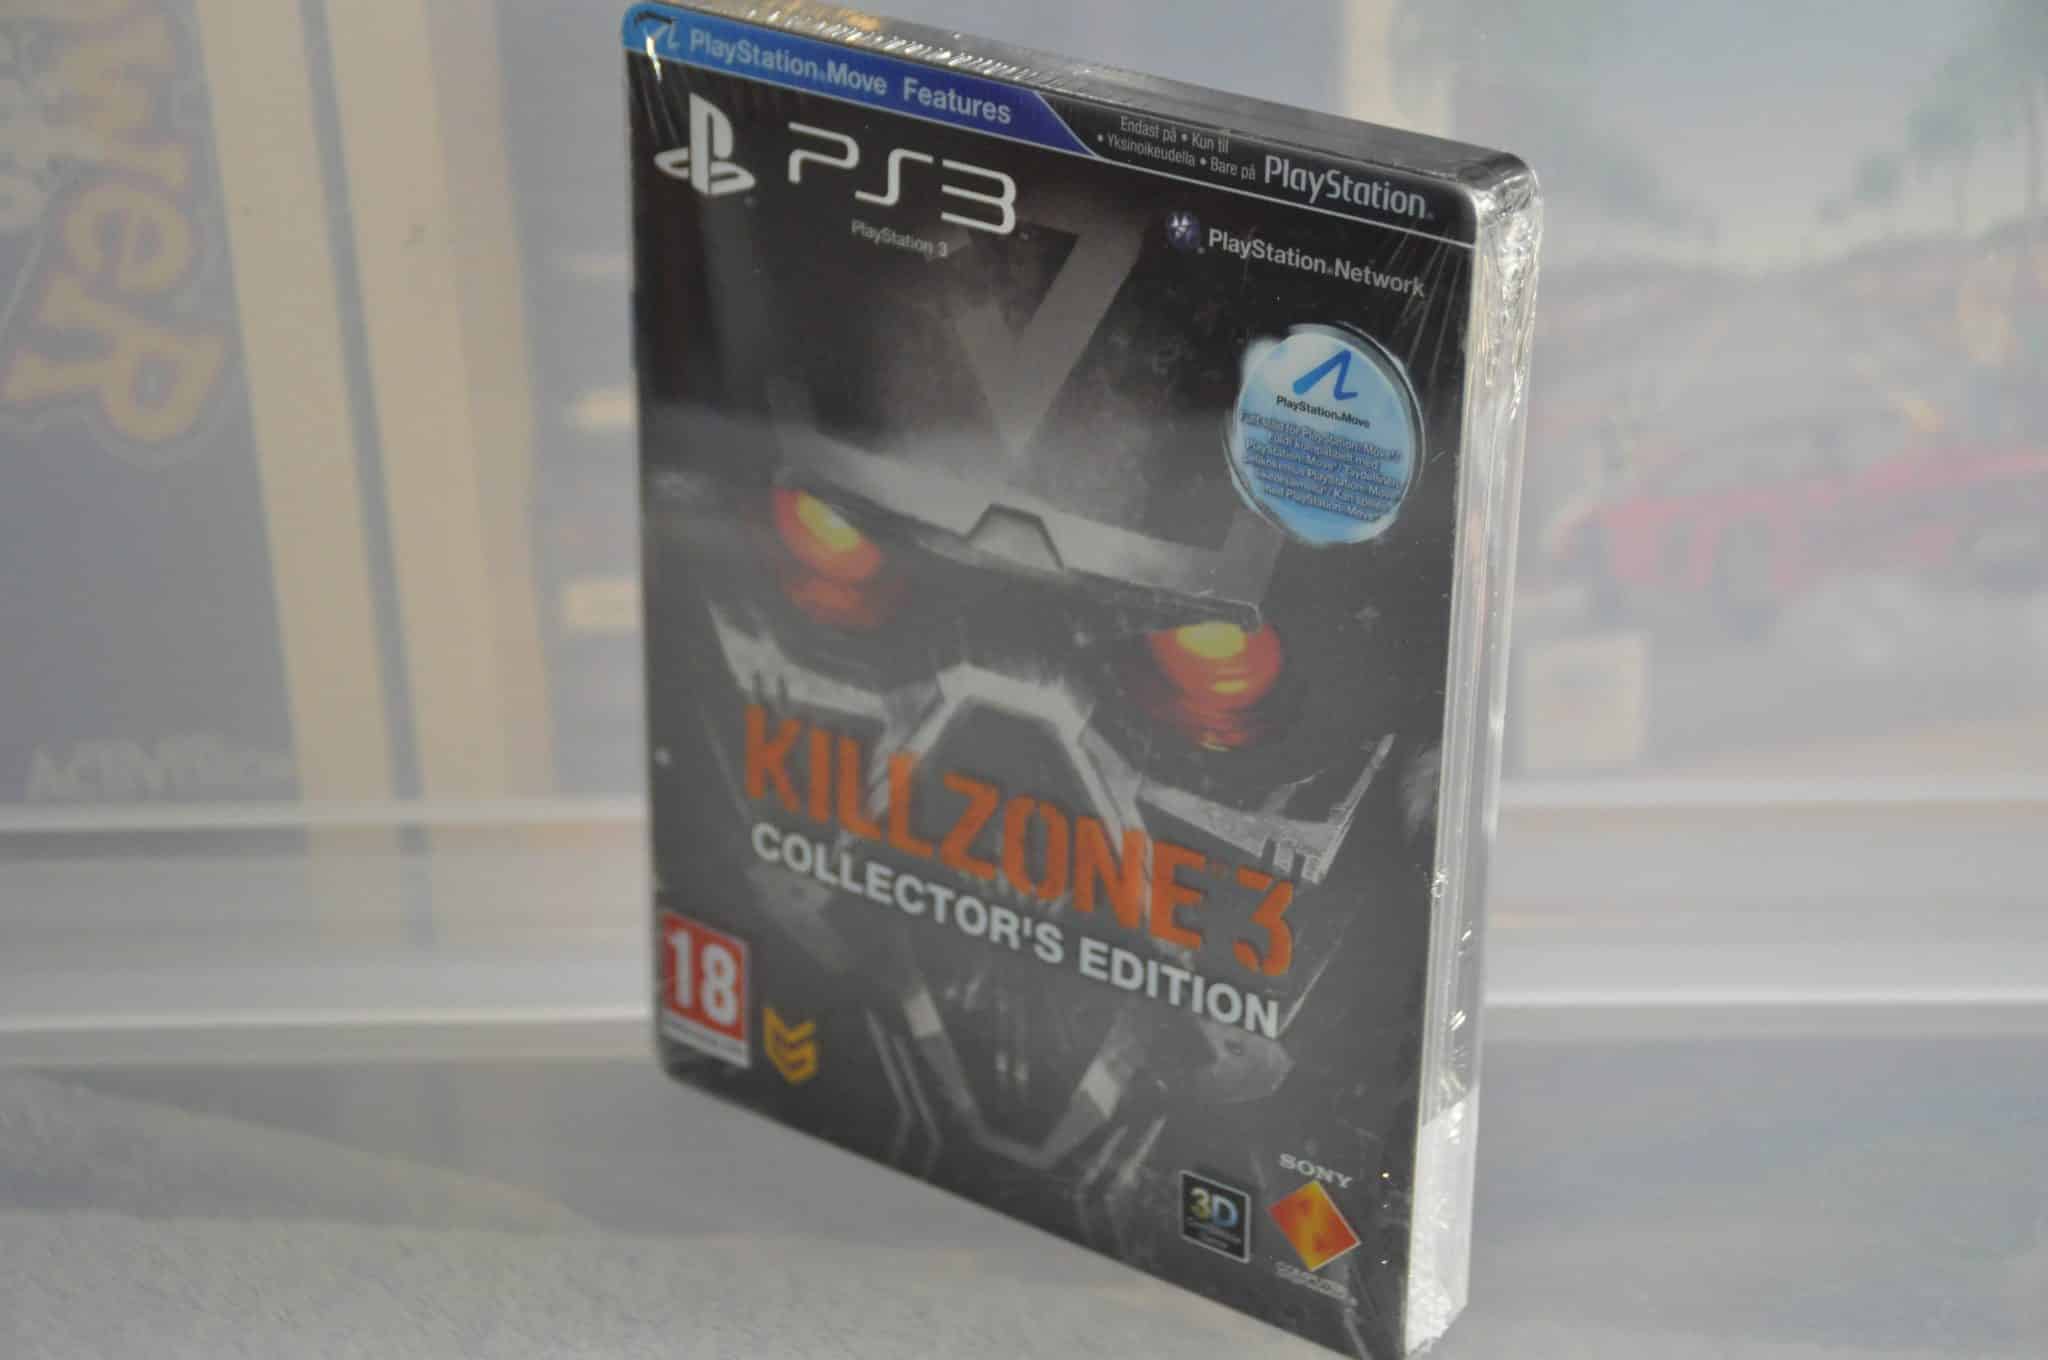 Killzone 3 limited edition packs in replica Helghast mask - GameSpot